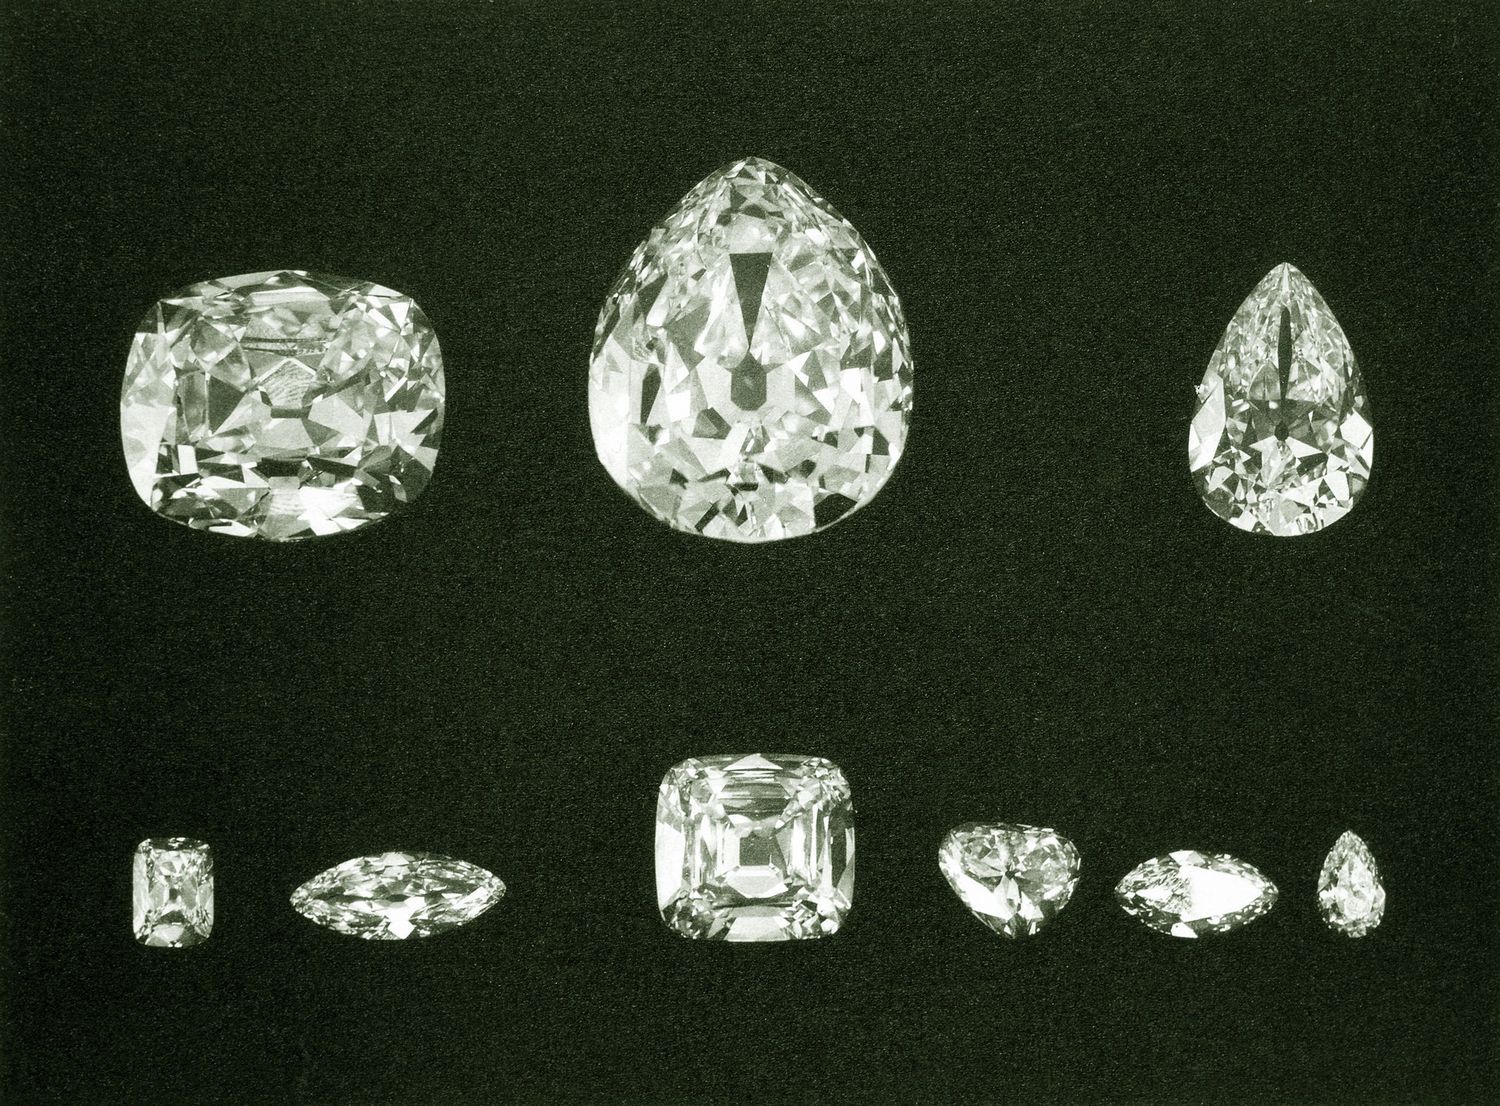 The 9 large diamonds cleaved from the Cullinan Diamond. The largest, Cullinan I and II were set in the Crown Jewels: the Sovereign's Sceptre and on the Imperial State Crown. The others (including the 96 smaller stones) were given to Asscher as payment for the cutting (although King Edward purchased Cullinan VI in a separate transaction). However, all the stones were then purchased by the South African government and given to Queen Mary in 1910. Queen Elizabeth frequently wore the brooch that Queen Mary made from Cullinan III and IV.  